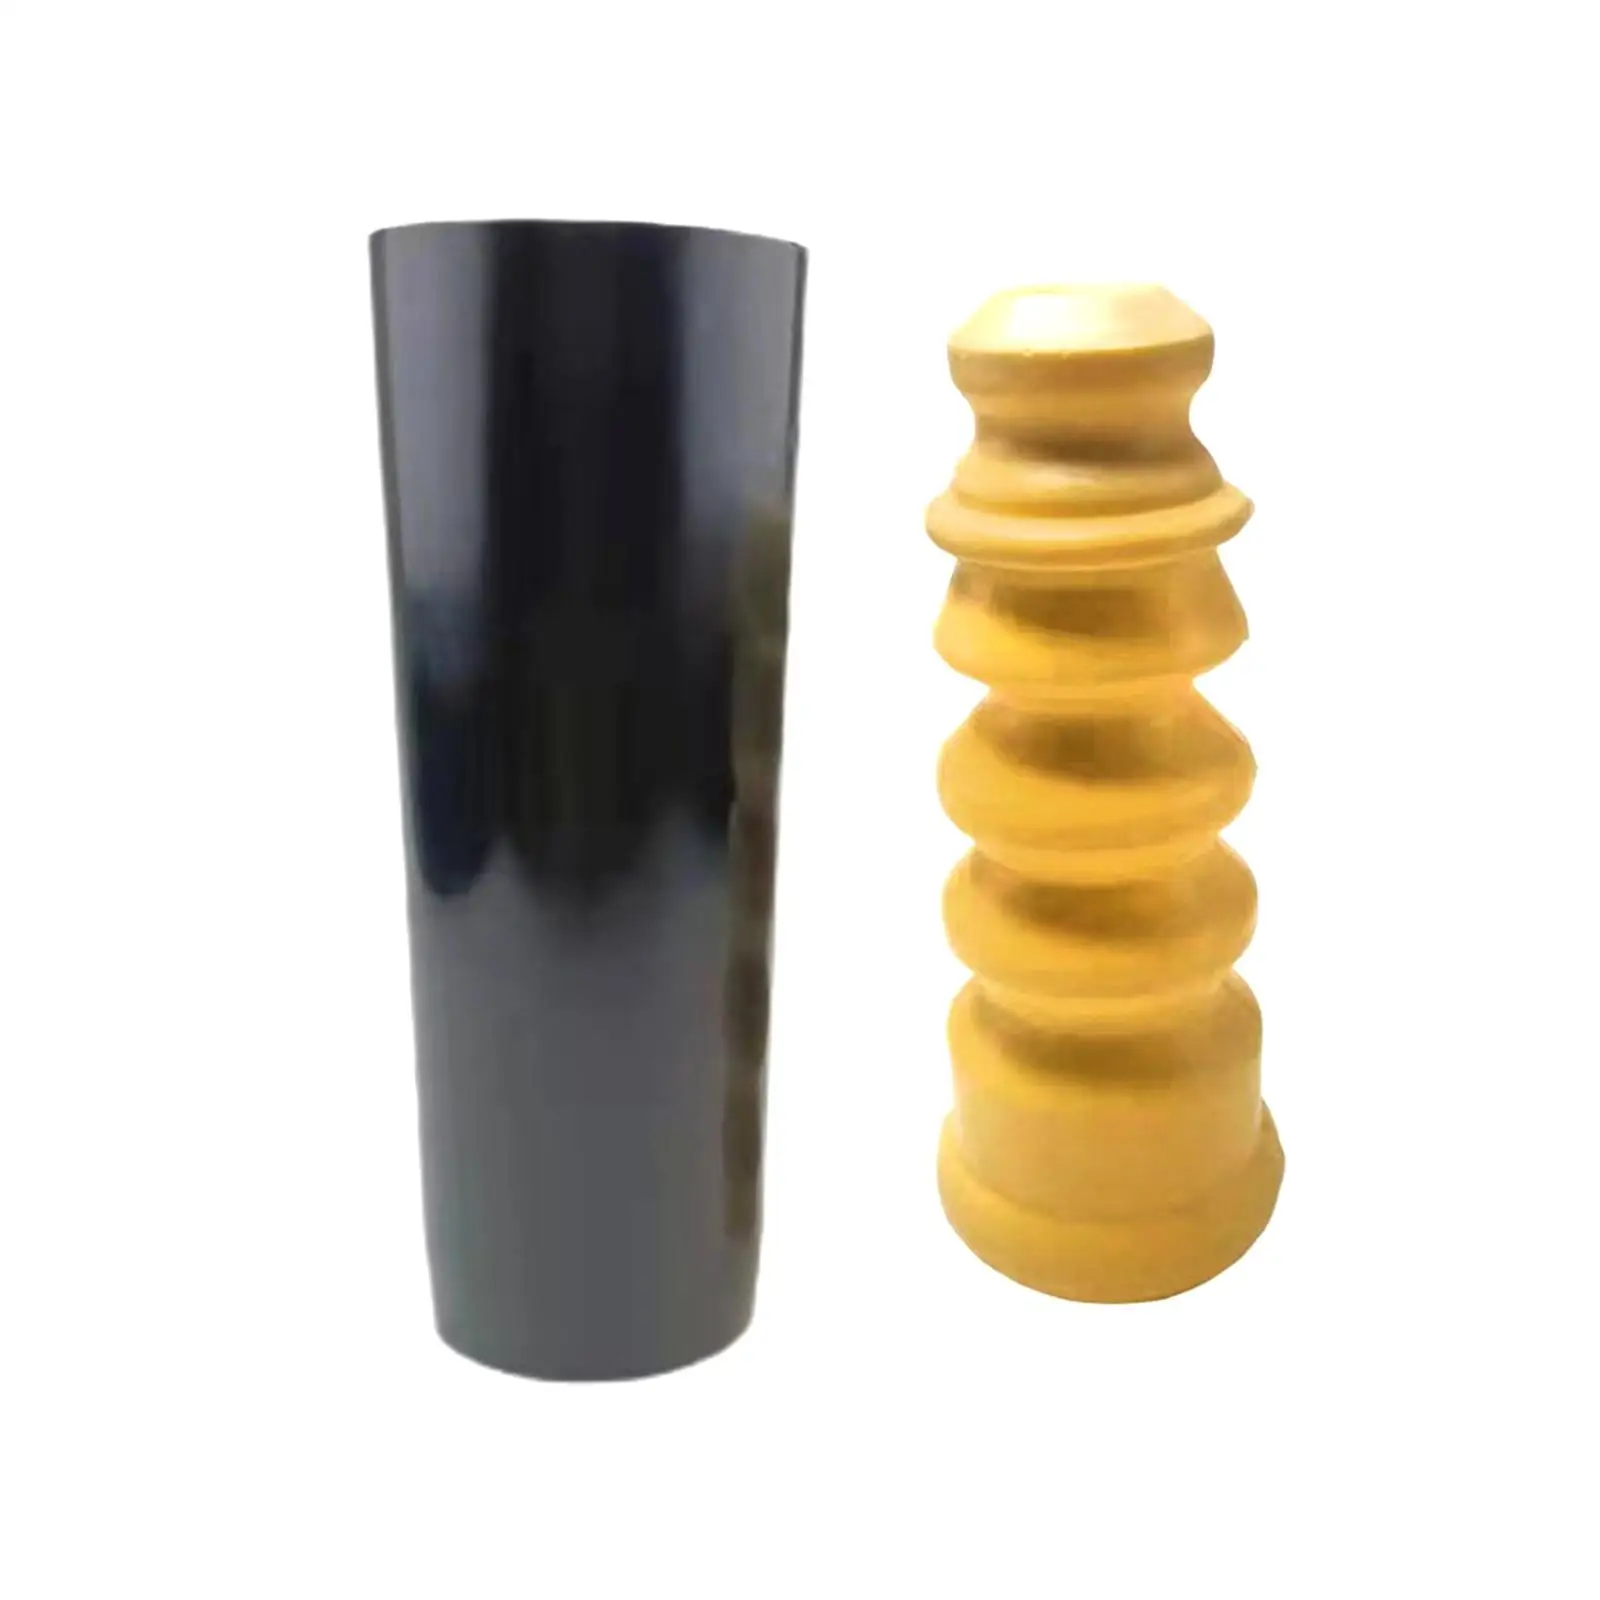 Rear Strut Bump Stop with Dust Cover Rubber 1J0512131B 1305638 1J0513425A for Audi A3 Durable Replace Parts